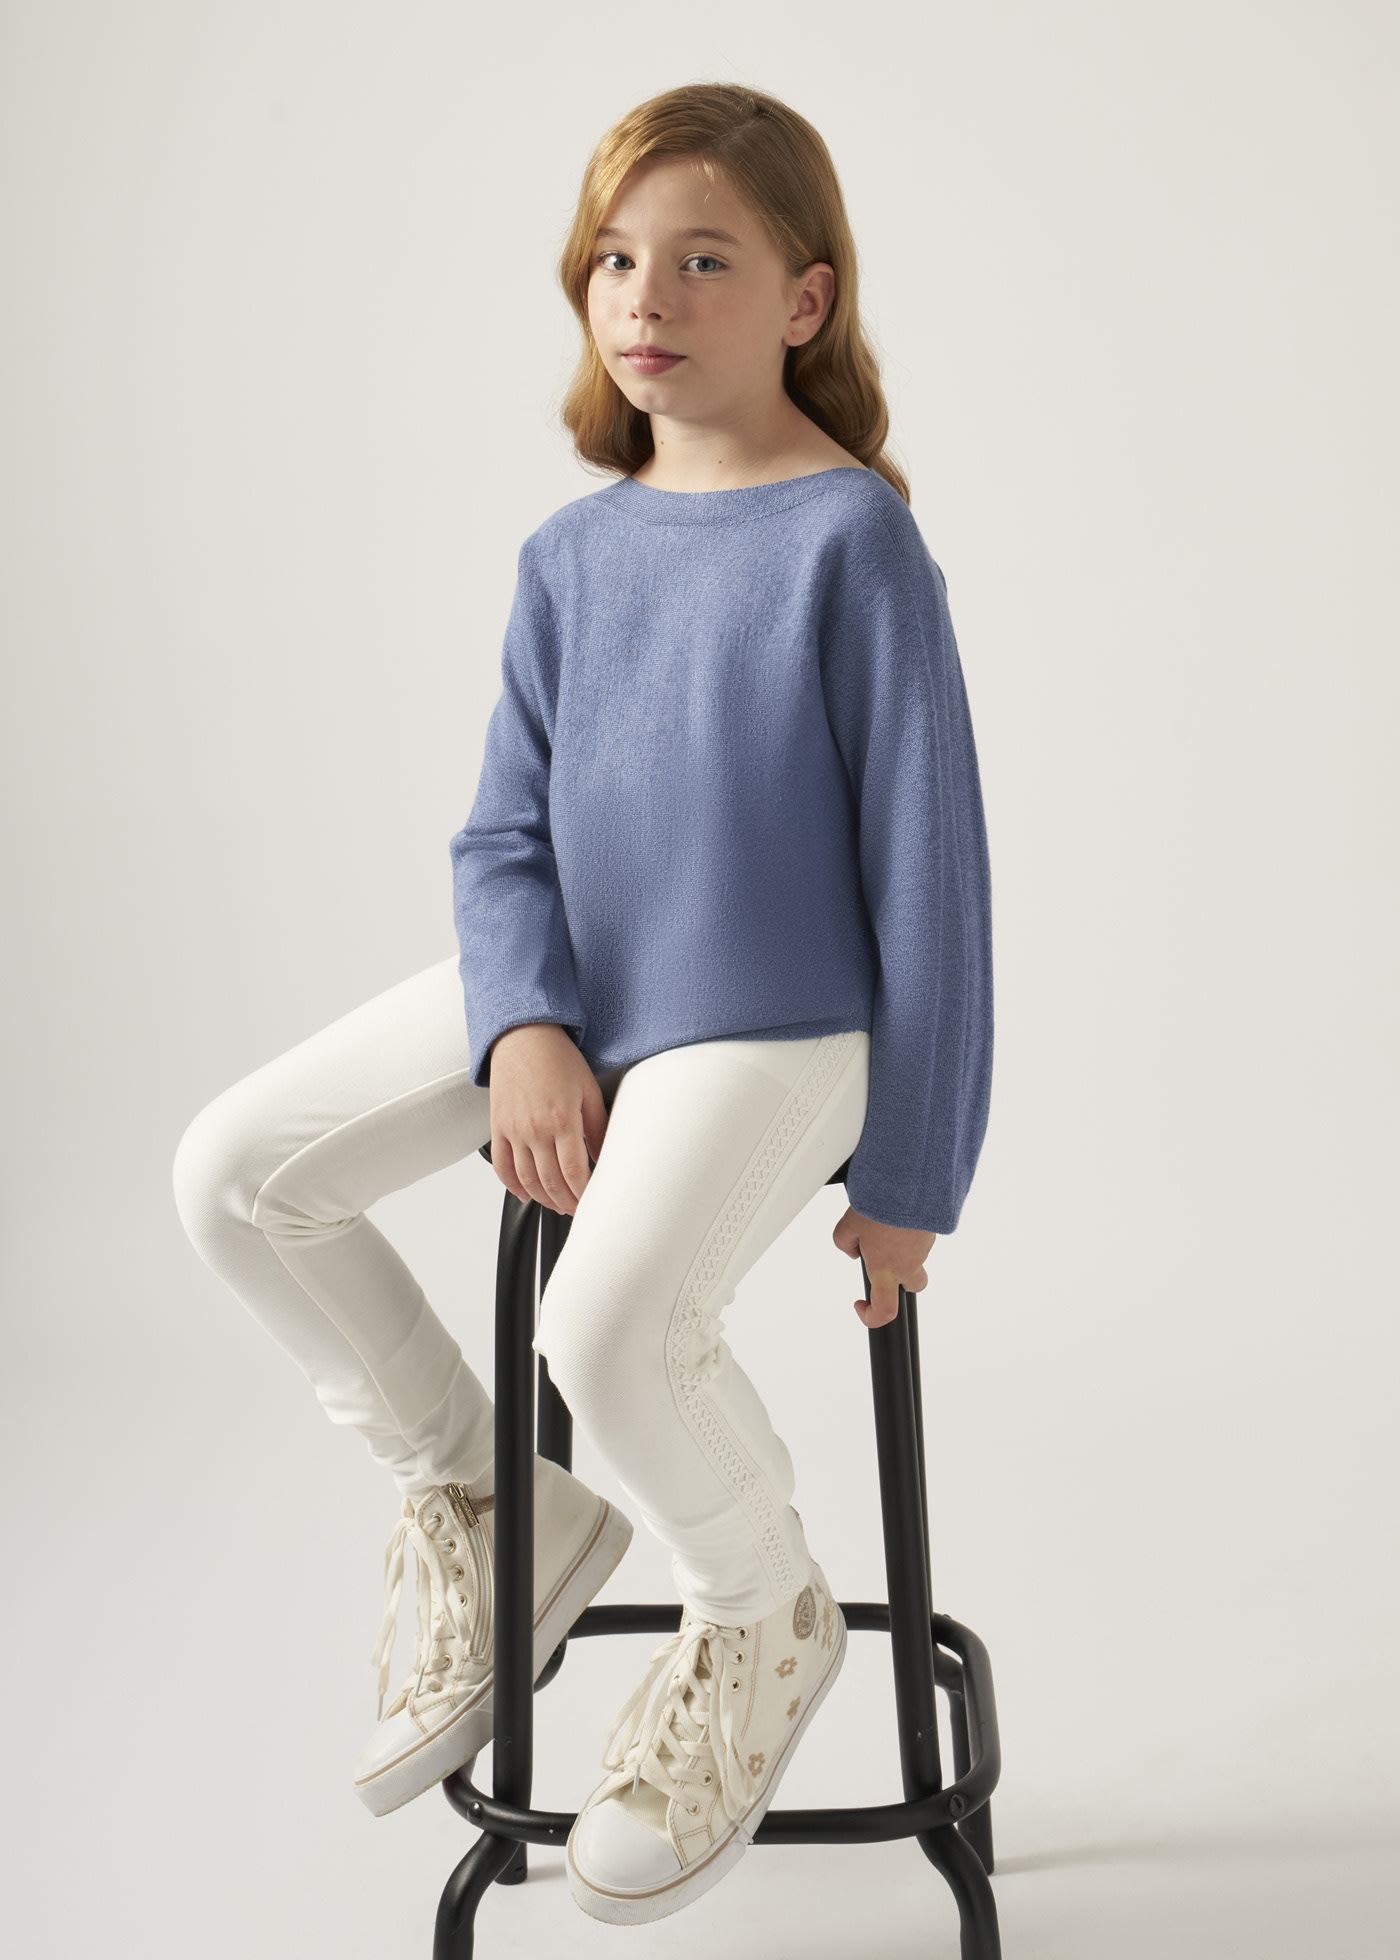 Girl Skinny Fit Twill Trousers